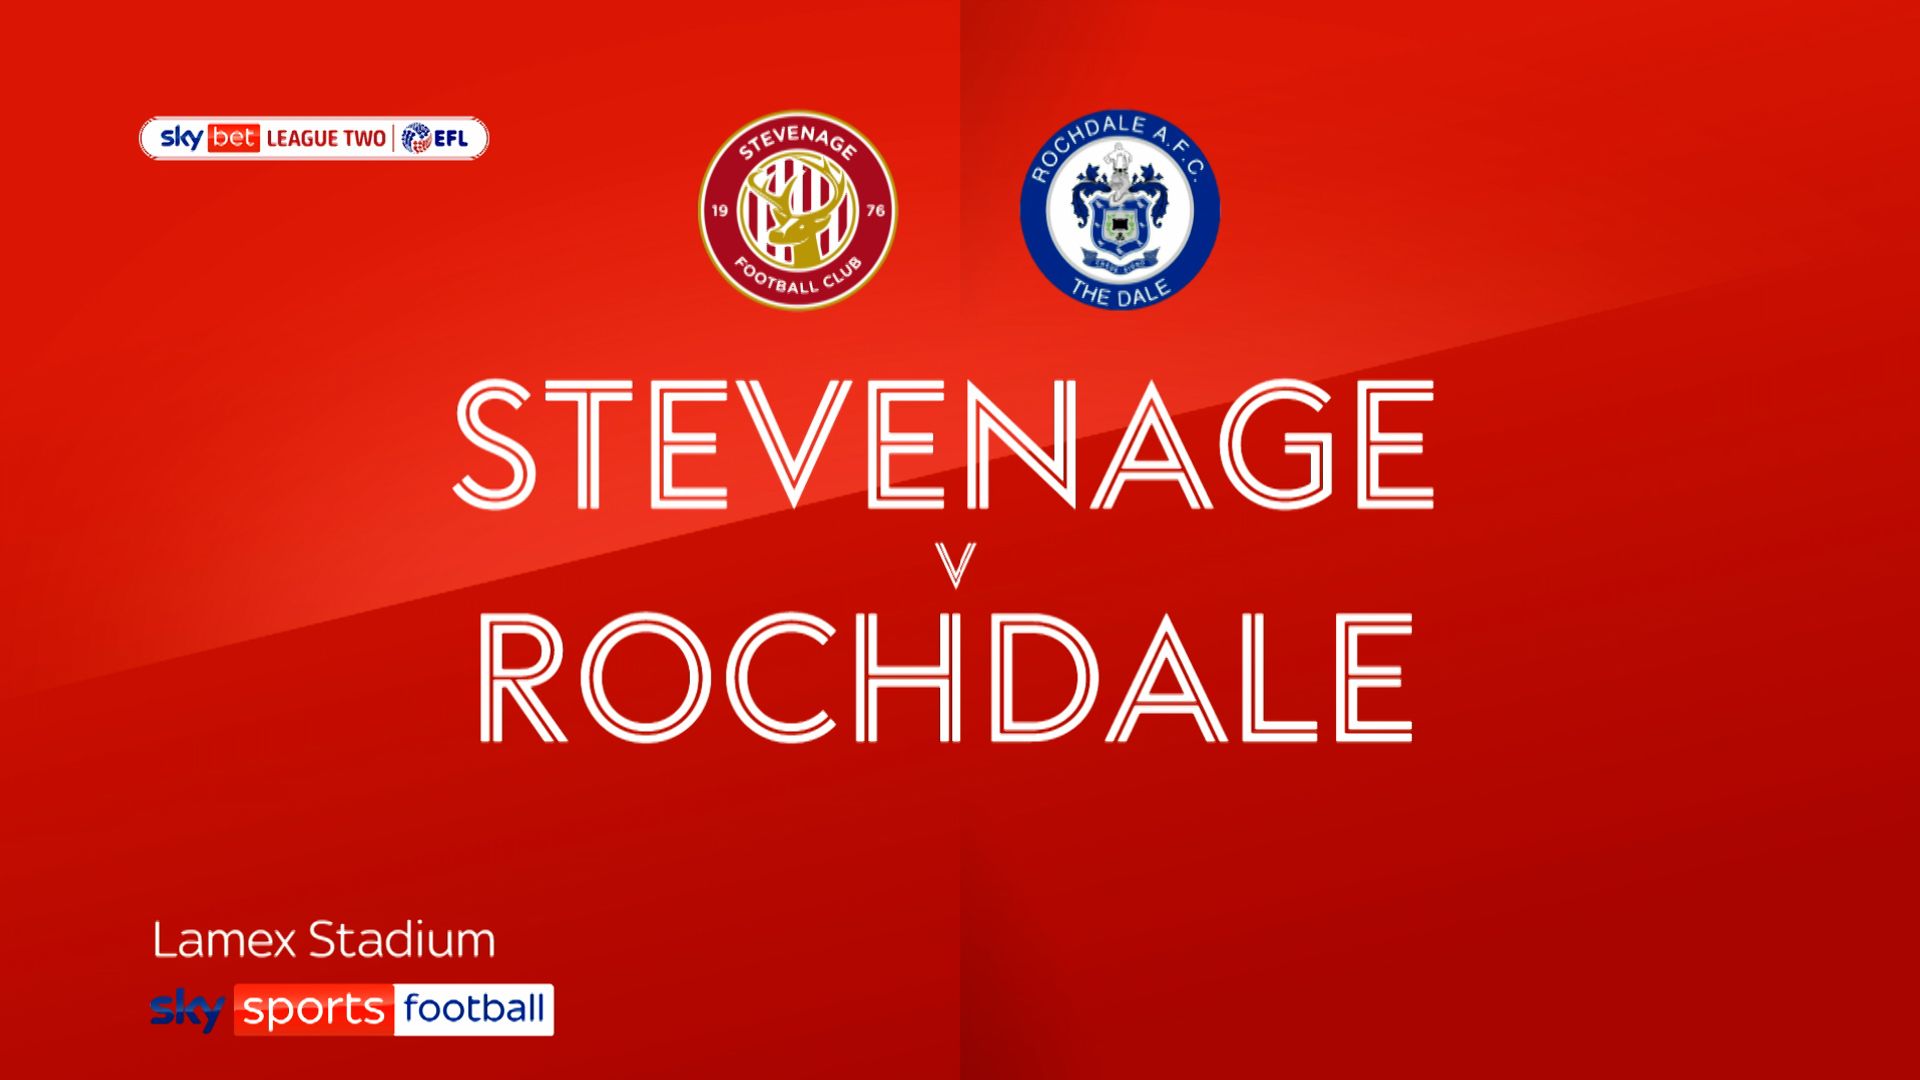 Stevenage 1-0 Rochdale: Carl Piergianni’s first-half header claims victory for Robbie Stockdale’s side